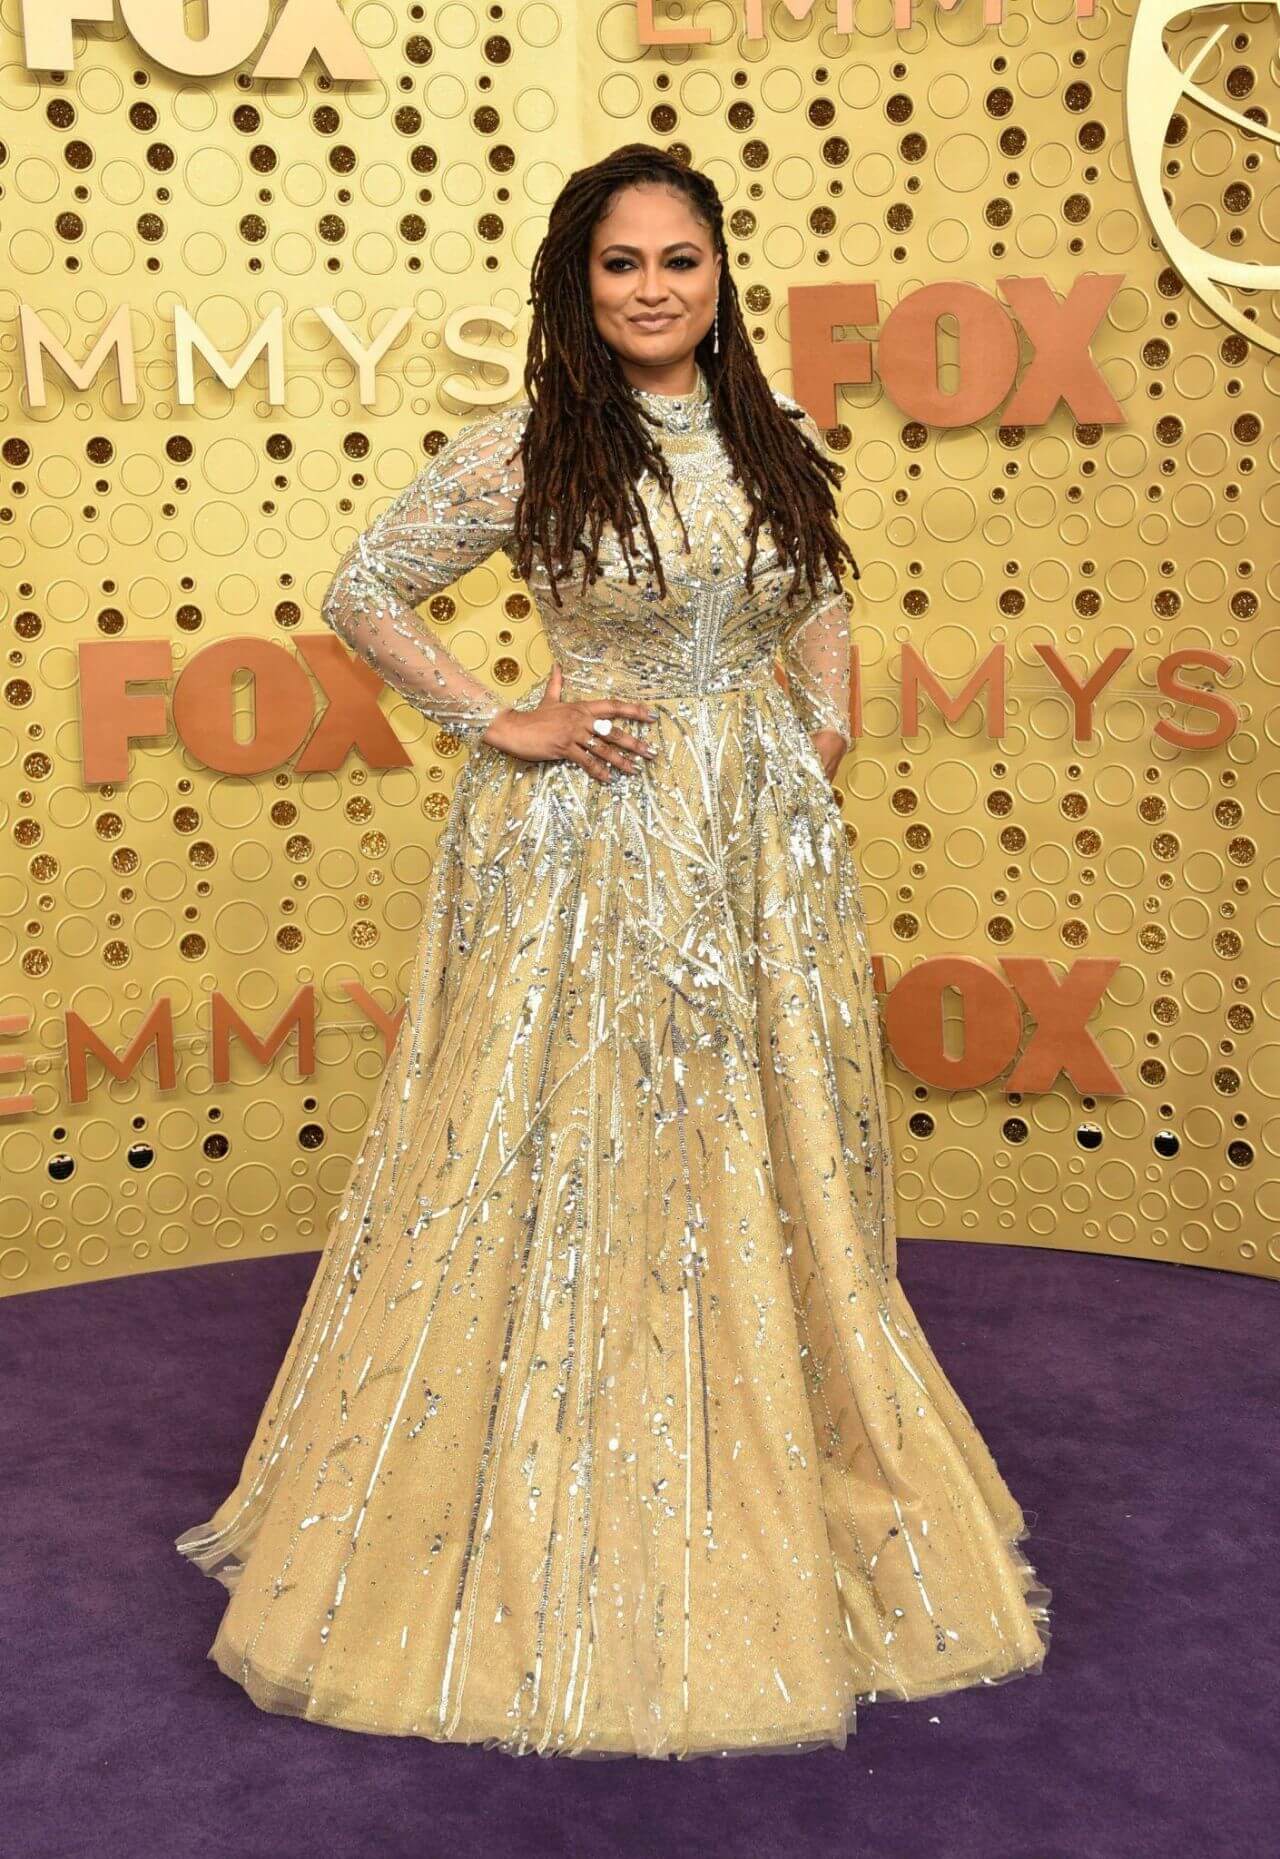 Ava DuVernay  In Golden Shimmery Work Long Flare Gown At Emmy Awards in Los Angeles